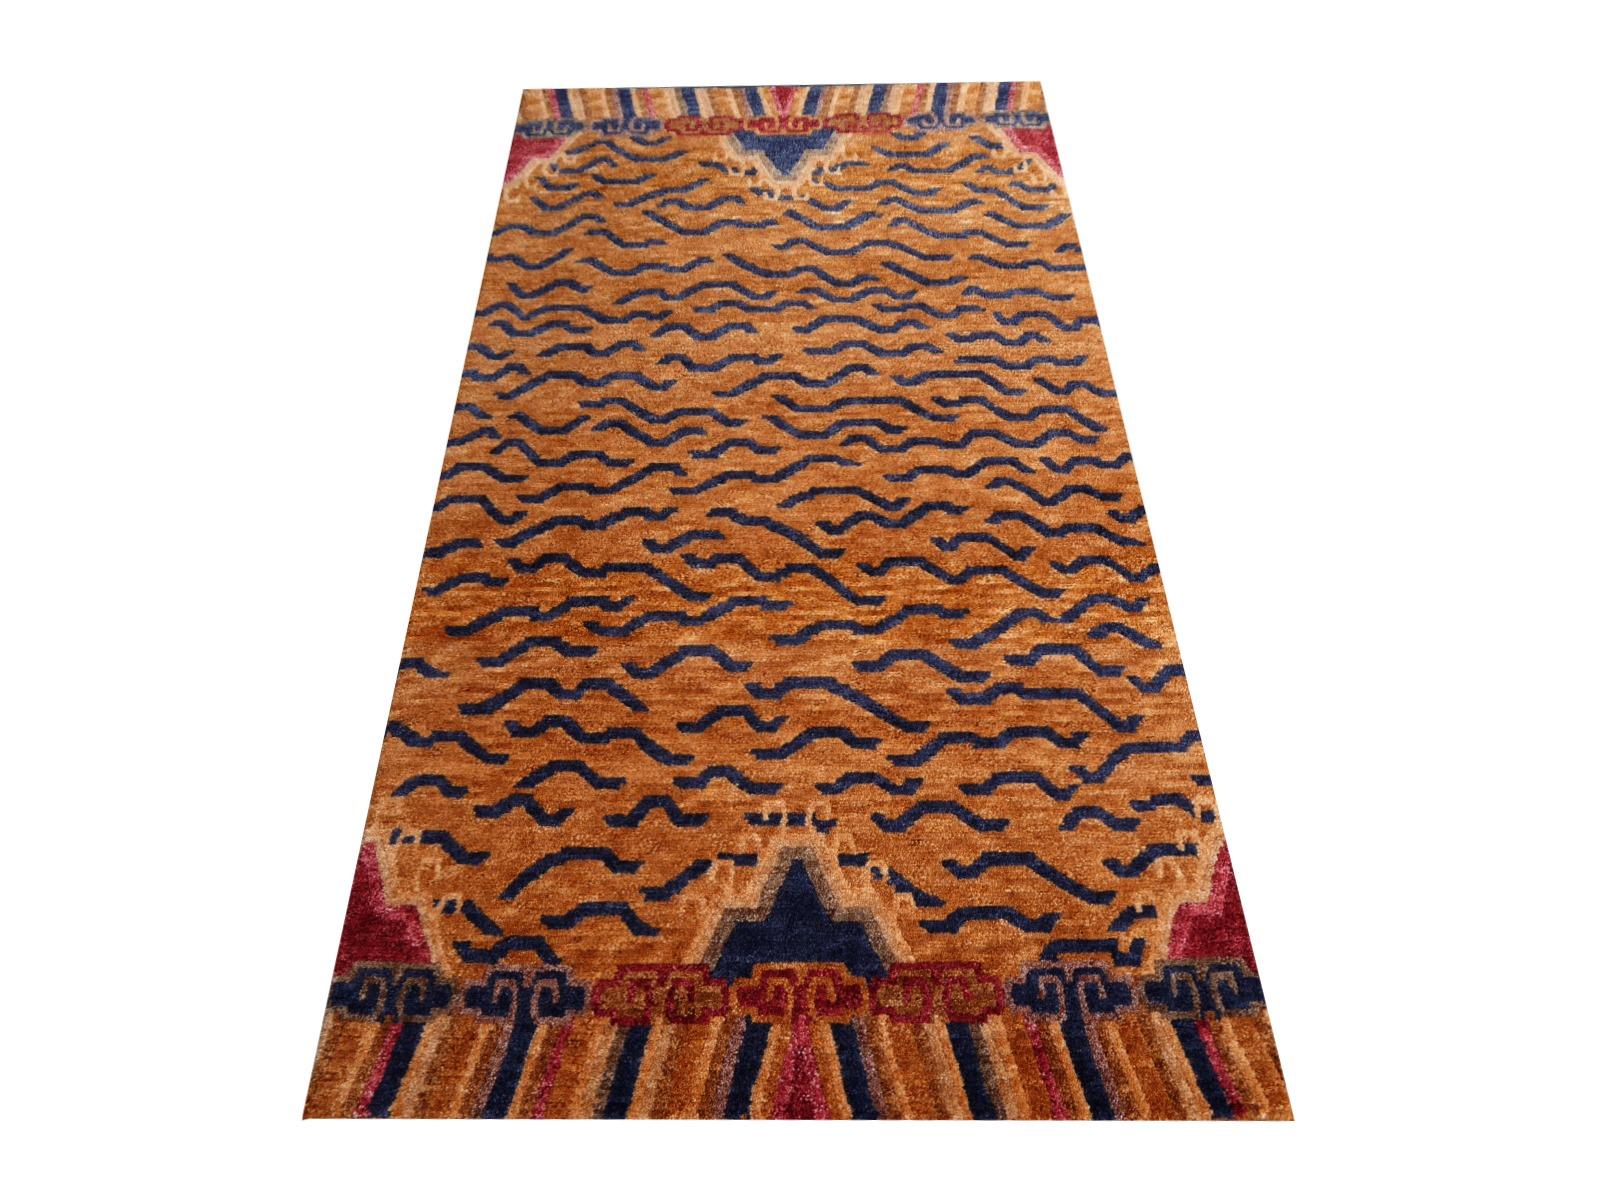 Nepalese Tibetan Tiger Rug Pure Wool Hand Knotted by Djoharian Collection Antique Design